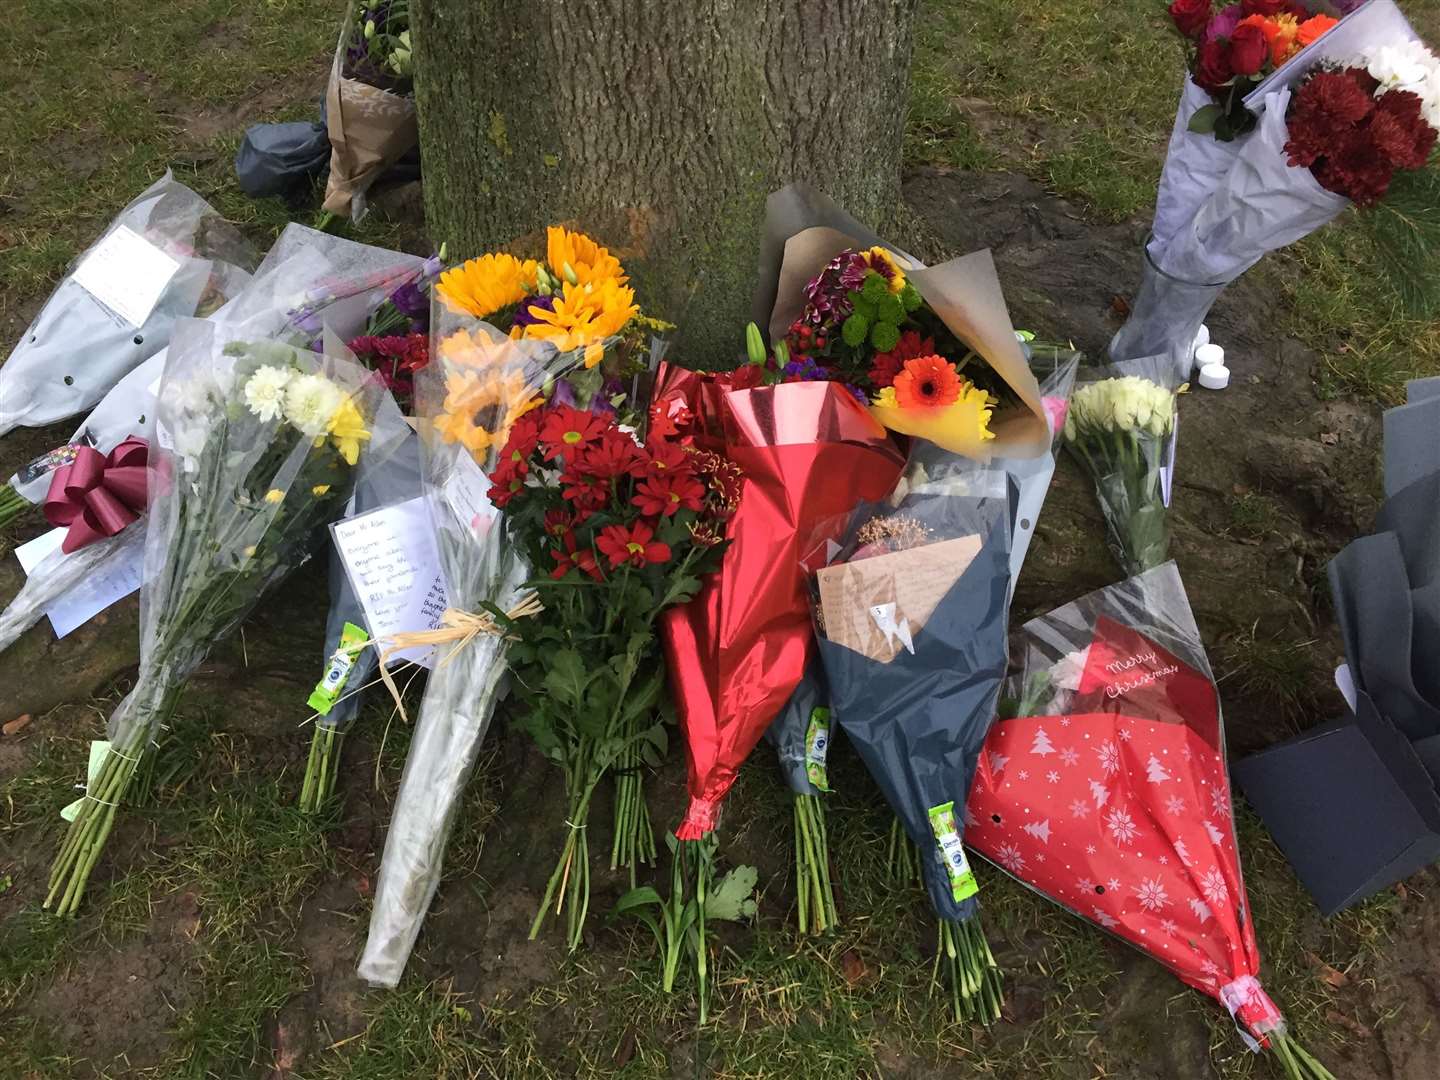 Tributes have flooded in after Ben Allen was named locally as the victim of the suspected hit-and-run